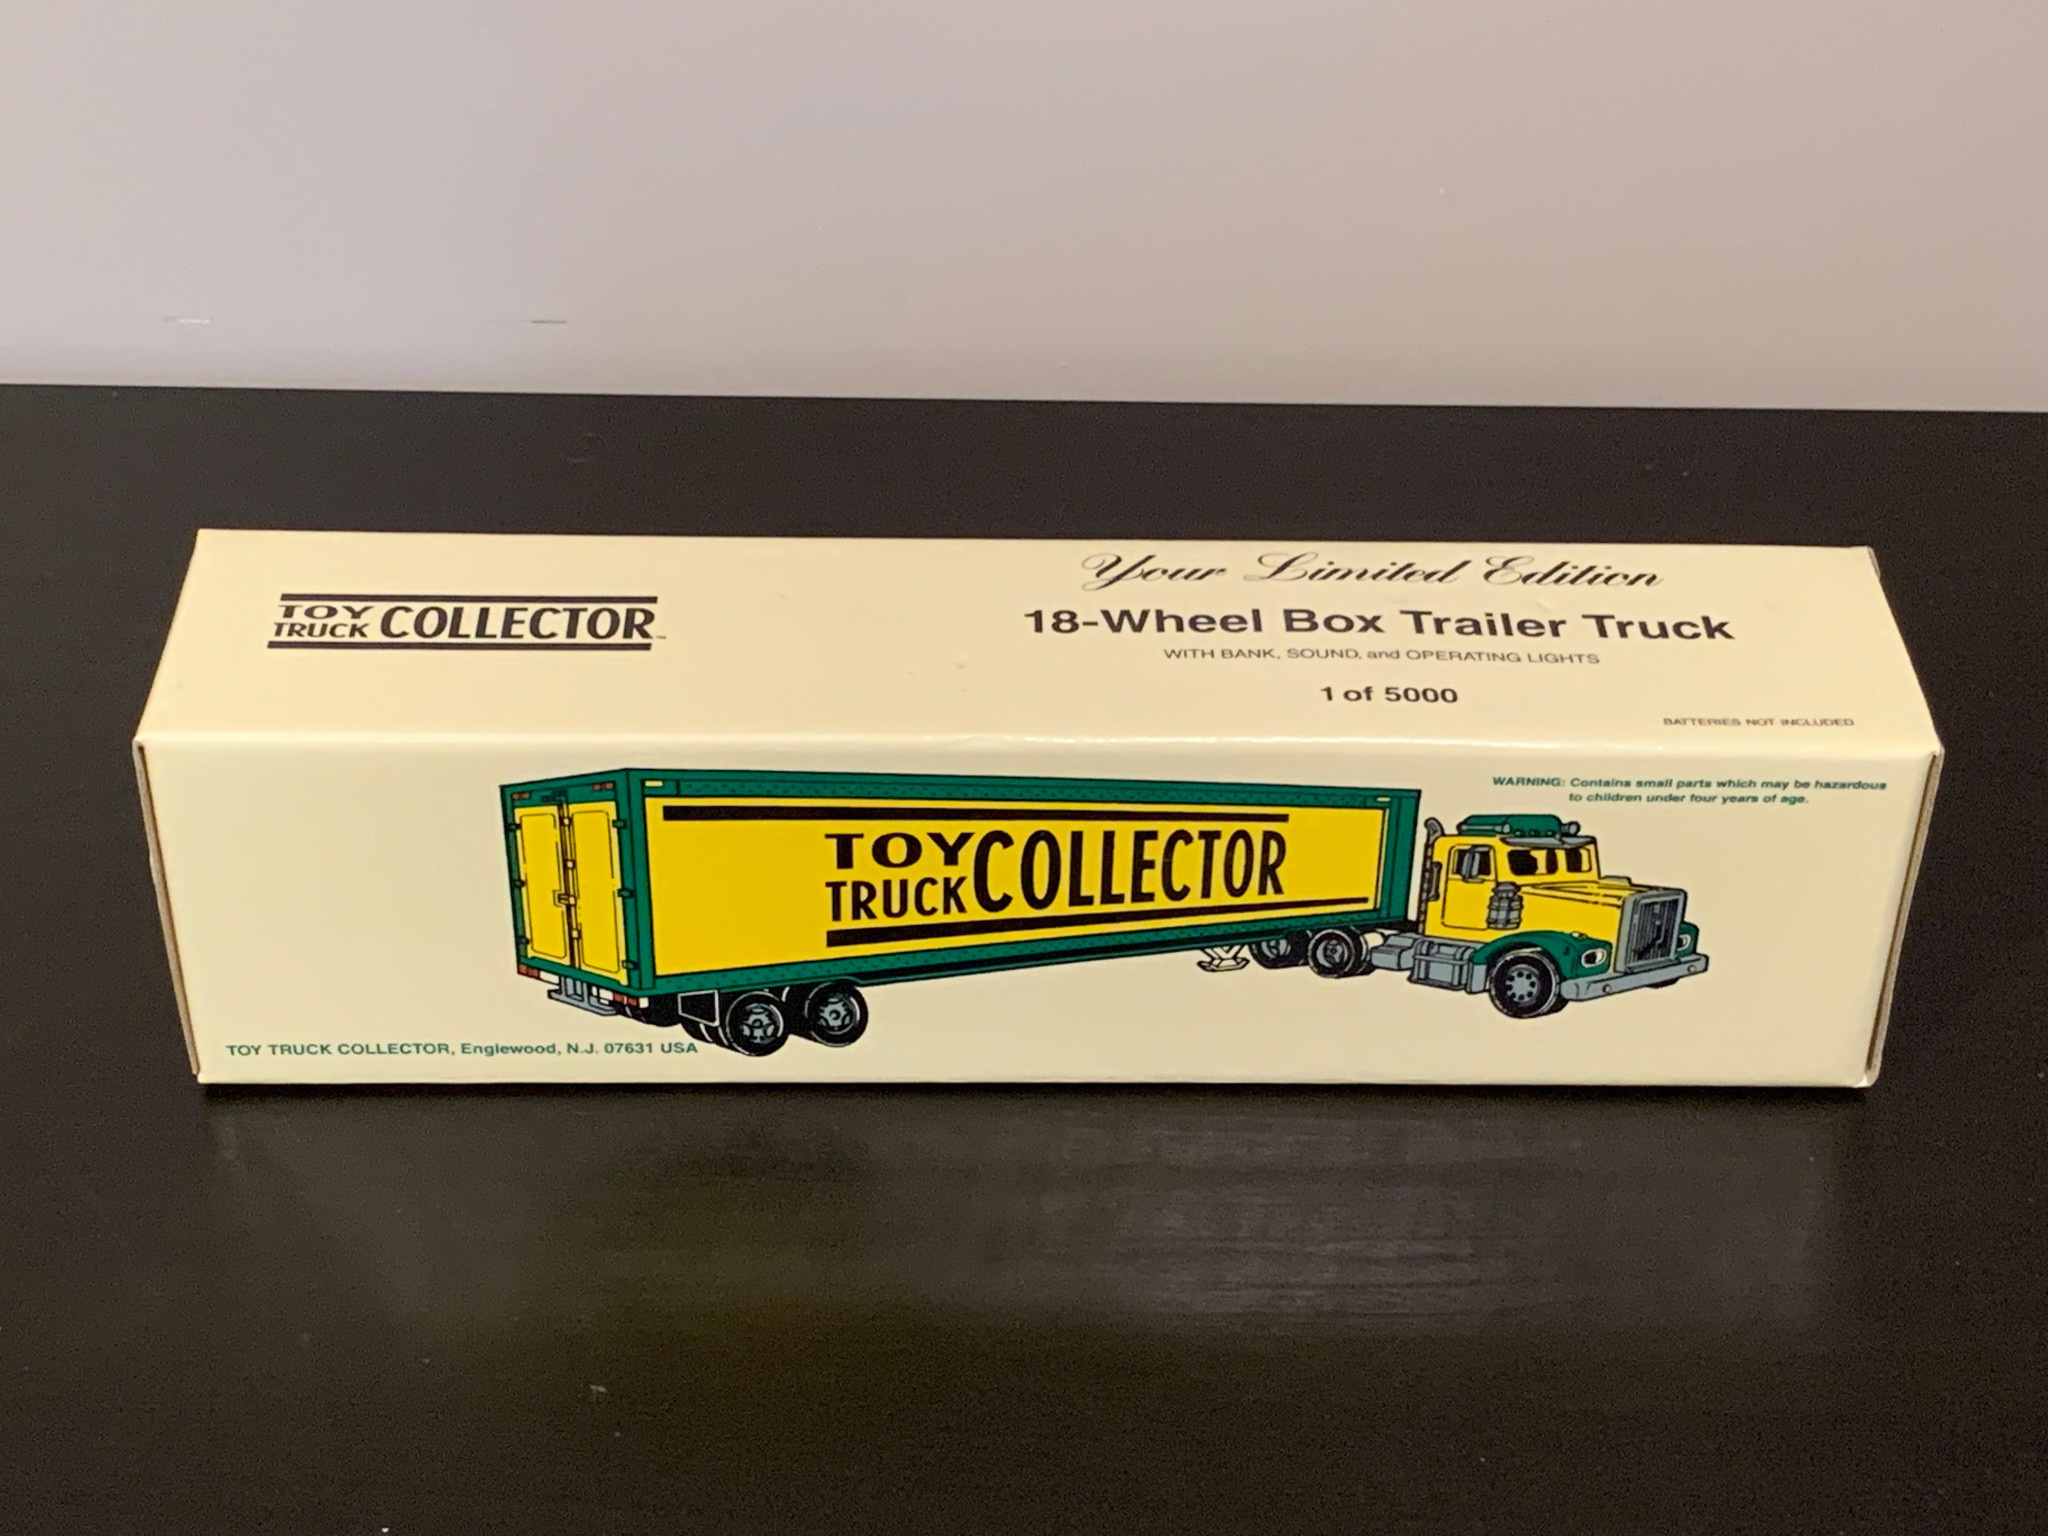 Toy Truck Collector Limited Edition 18-Wheel Box Trailer Truck with Bank 1995